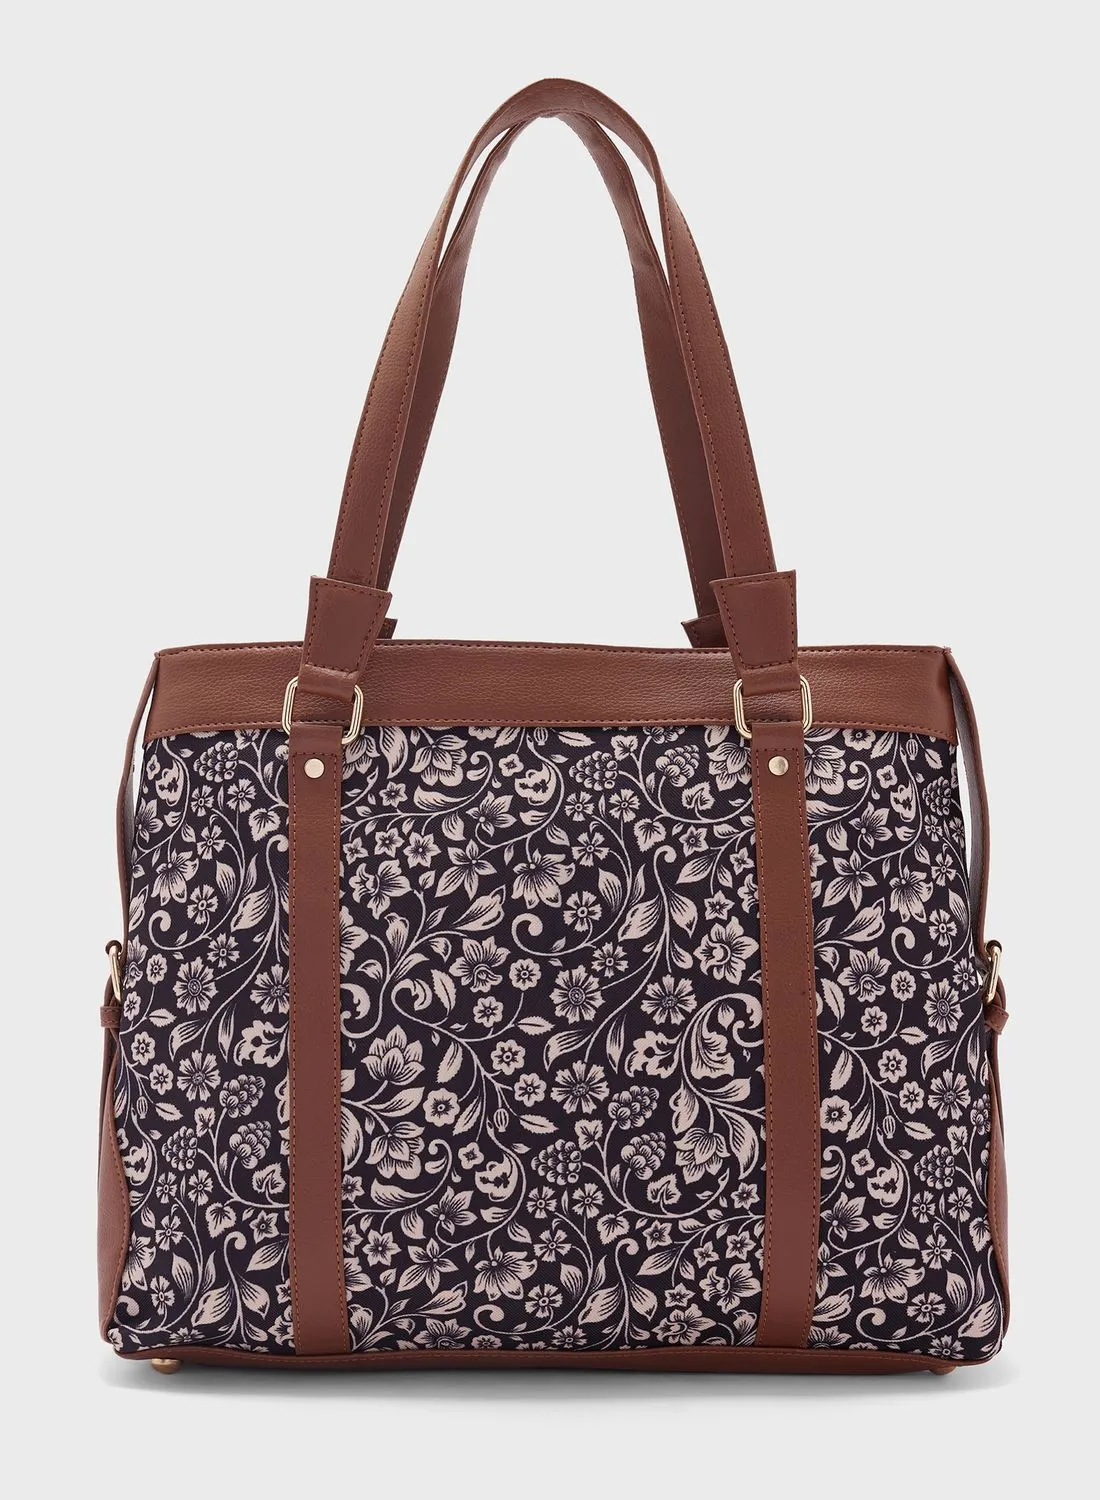 ELLA Floral Print Canvas Tote Bag With Laptop Sleeve